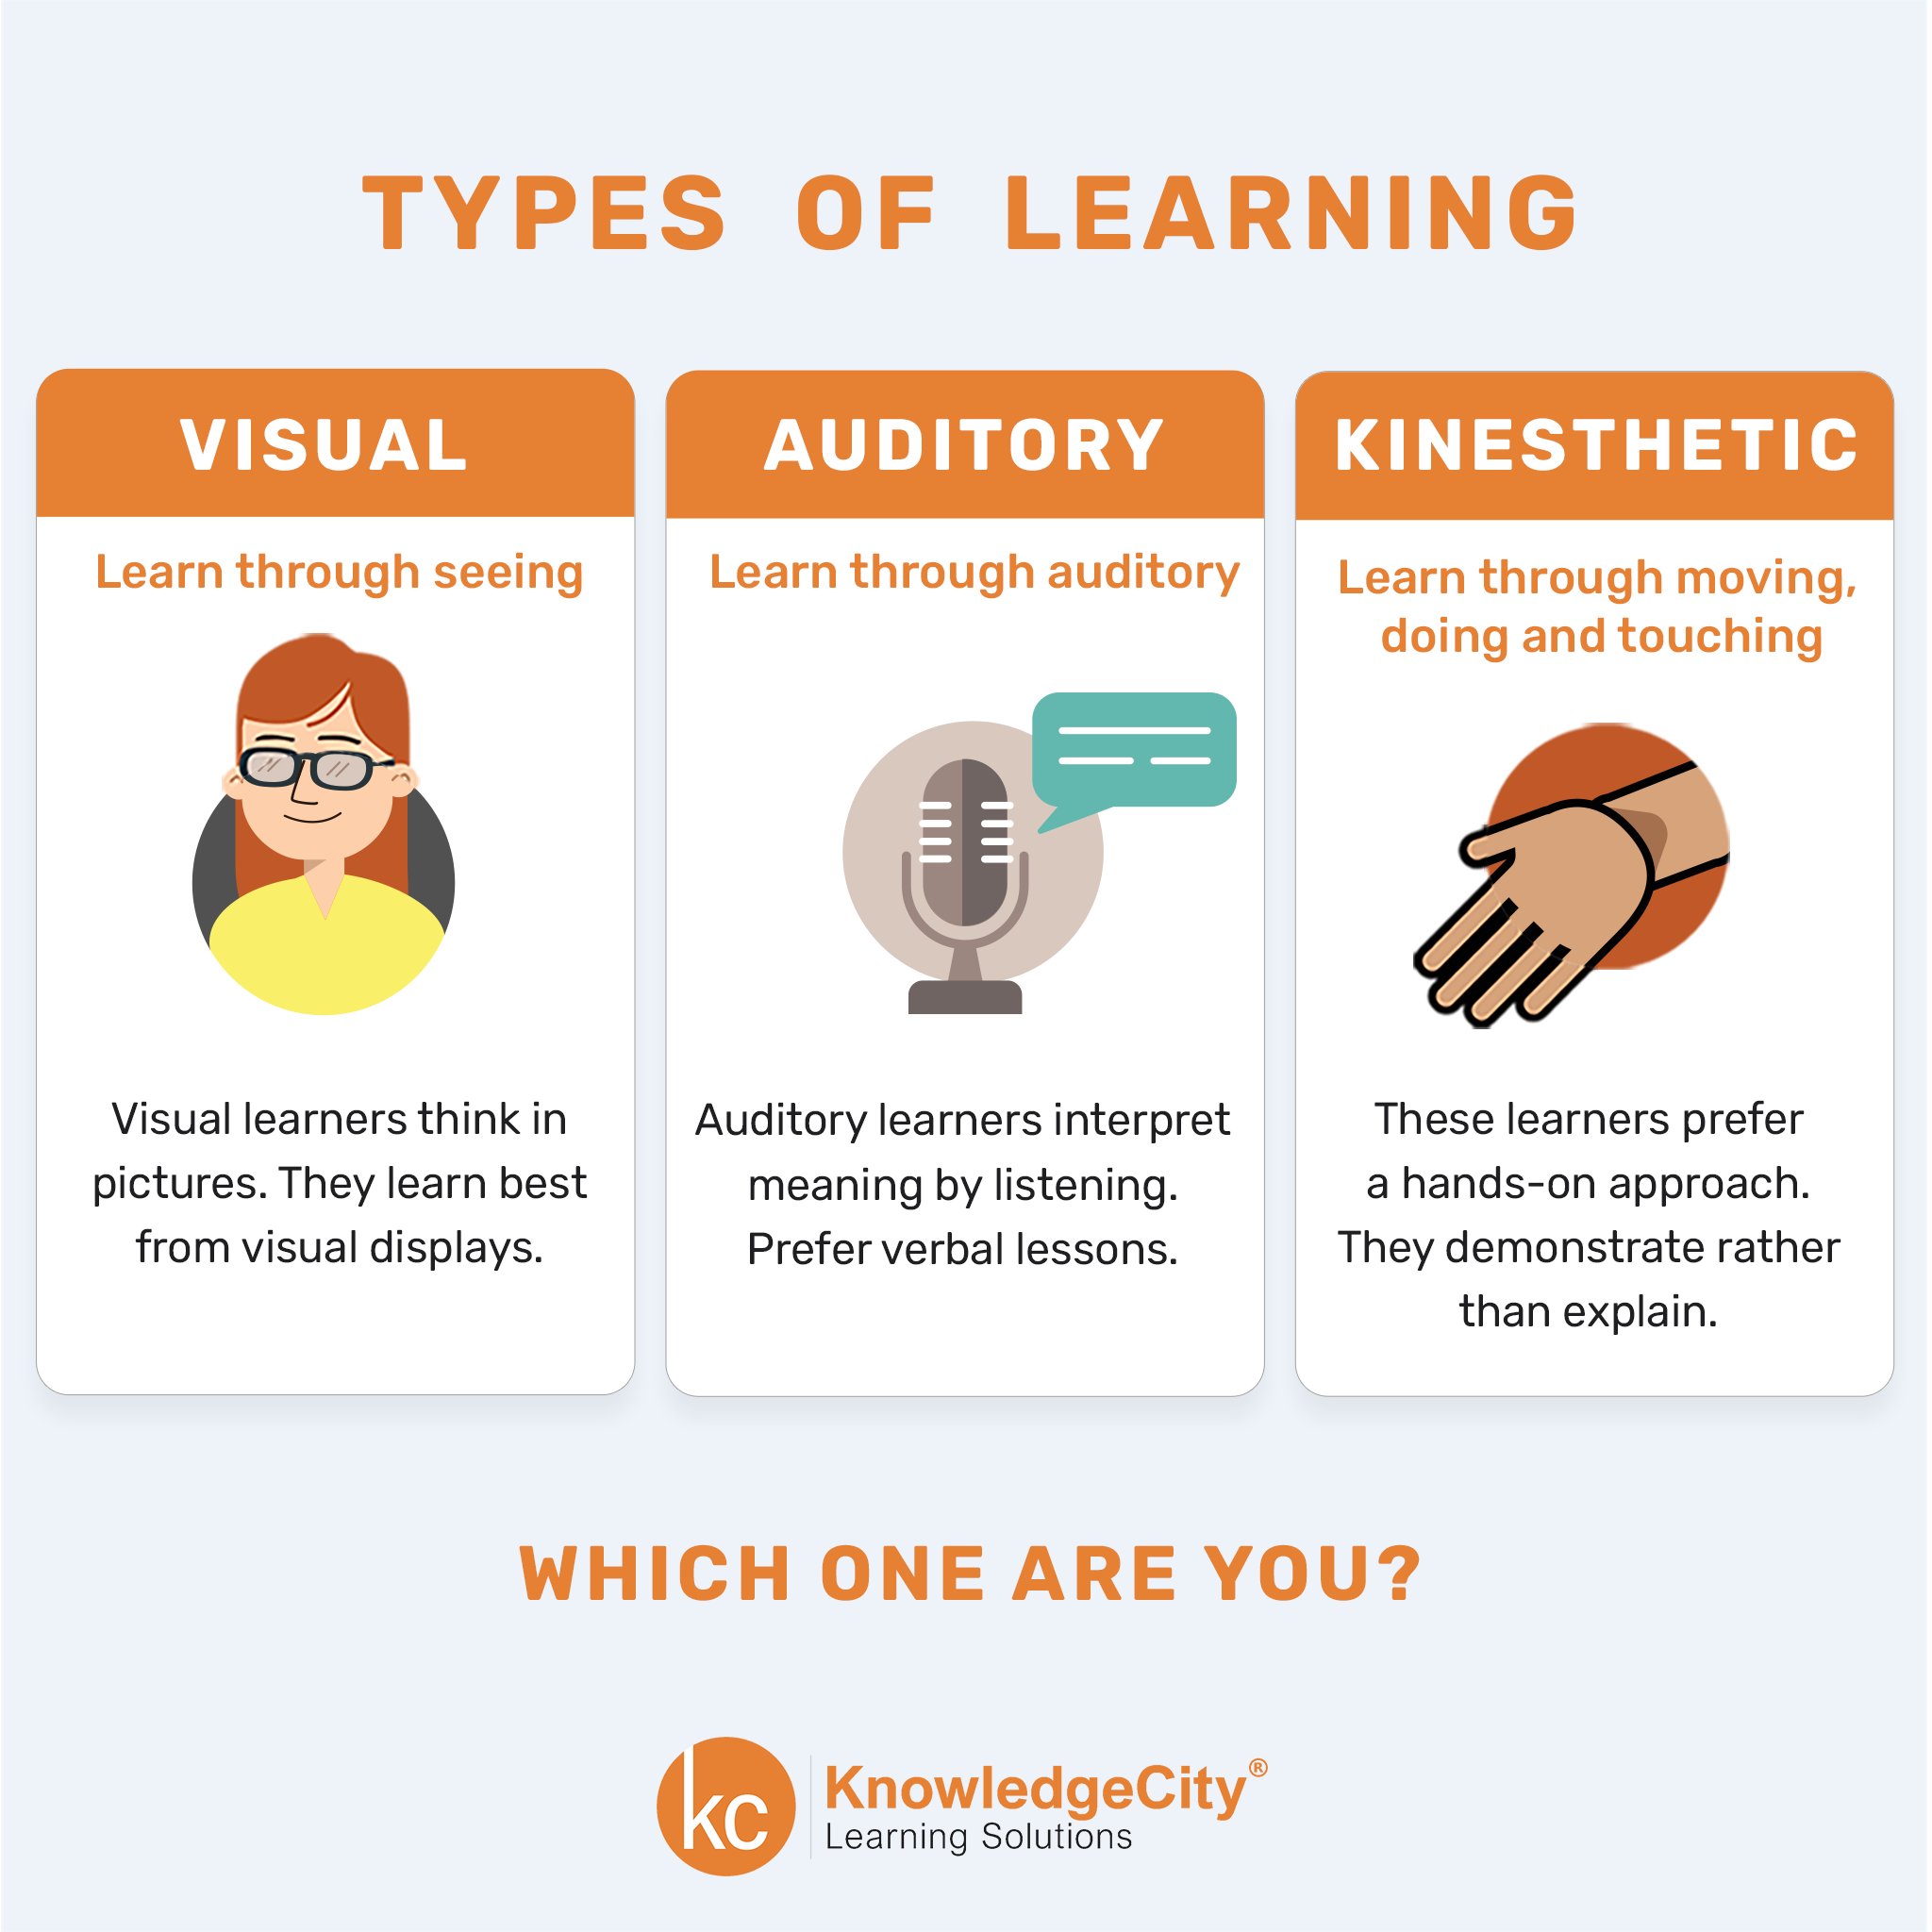 What are the 3 types of ways to learn?